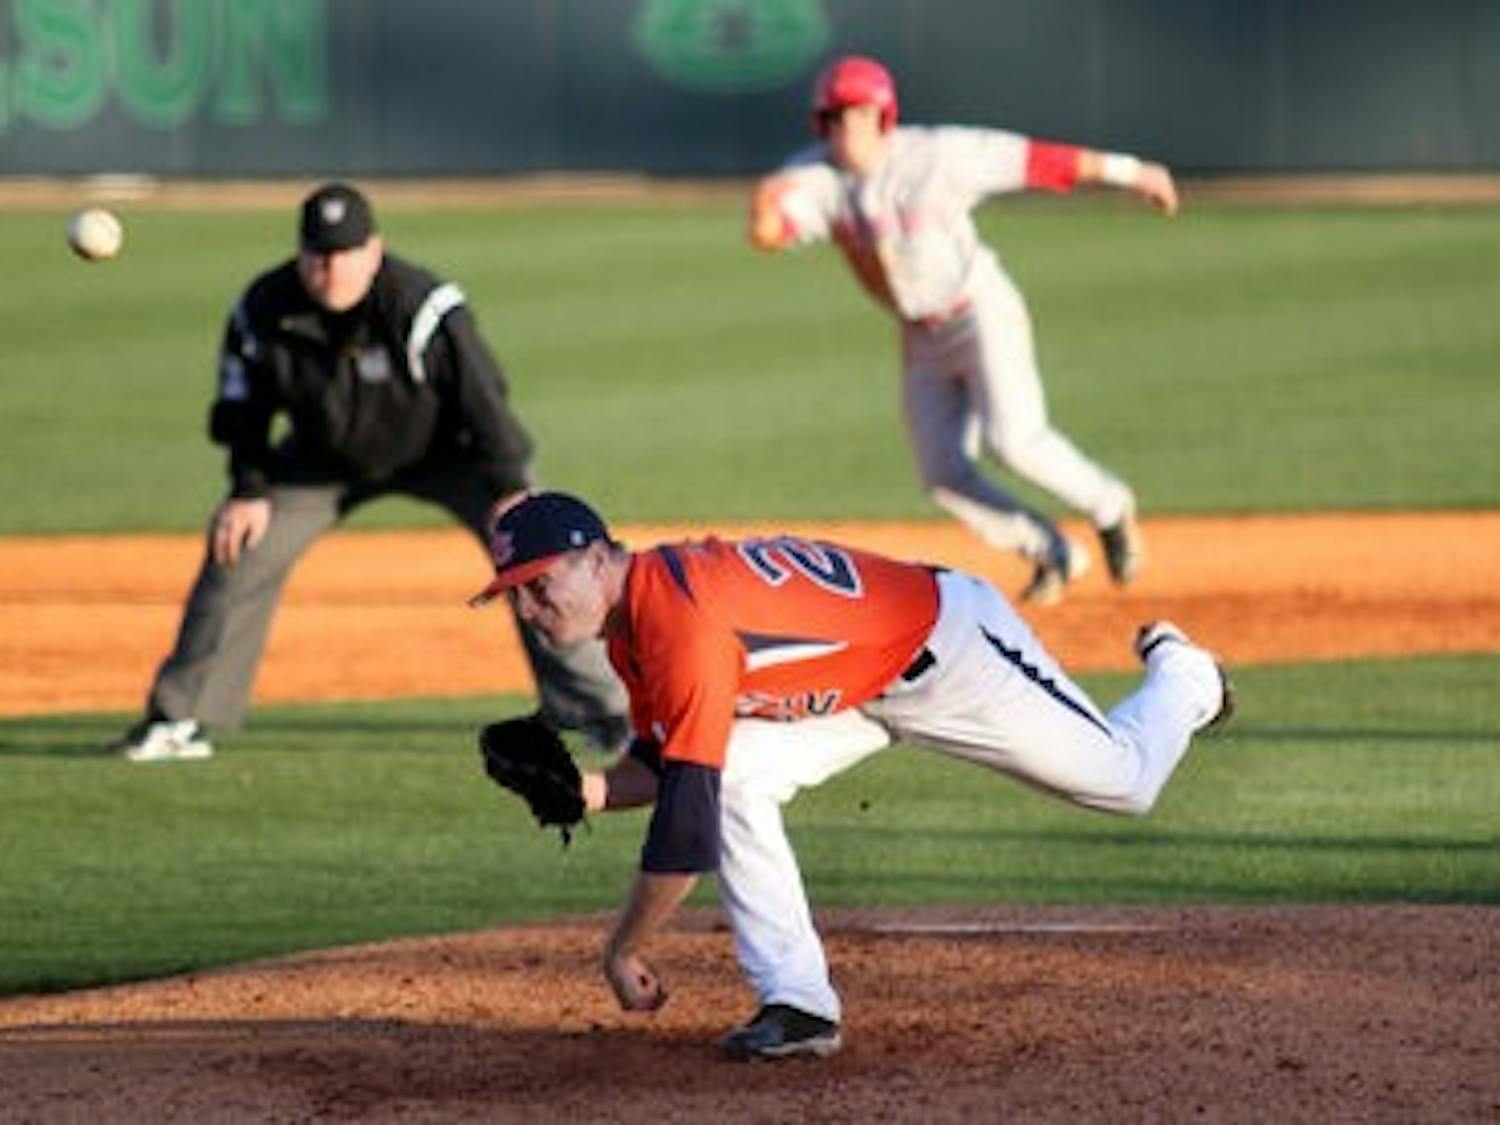 Senior pitcher Sean Ray pitches during Auburn's 8-6 loss against Radford Friday afternoon. (Emily Adams / Photo Editor)